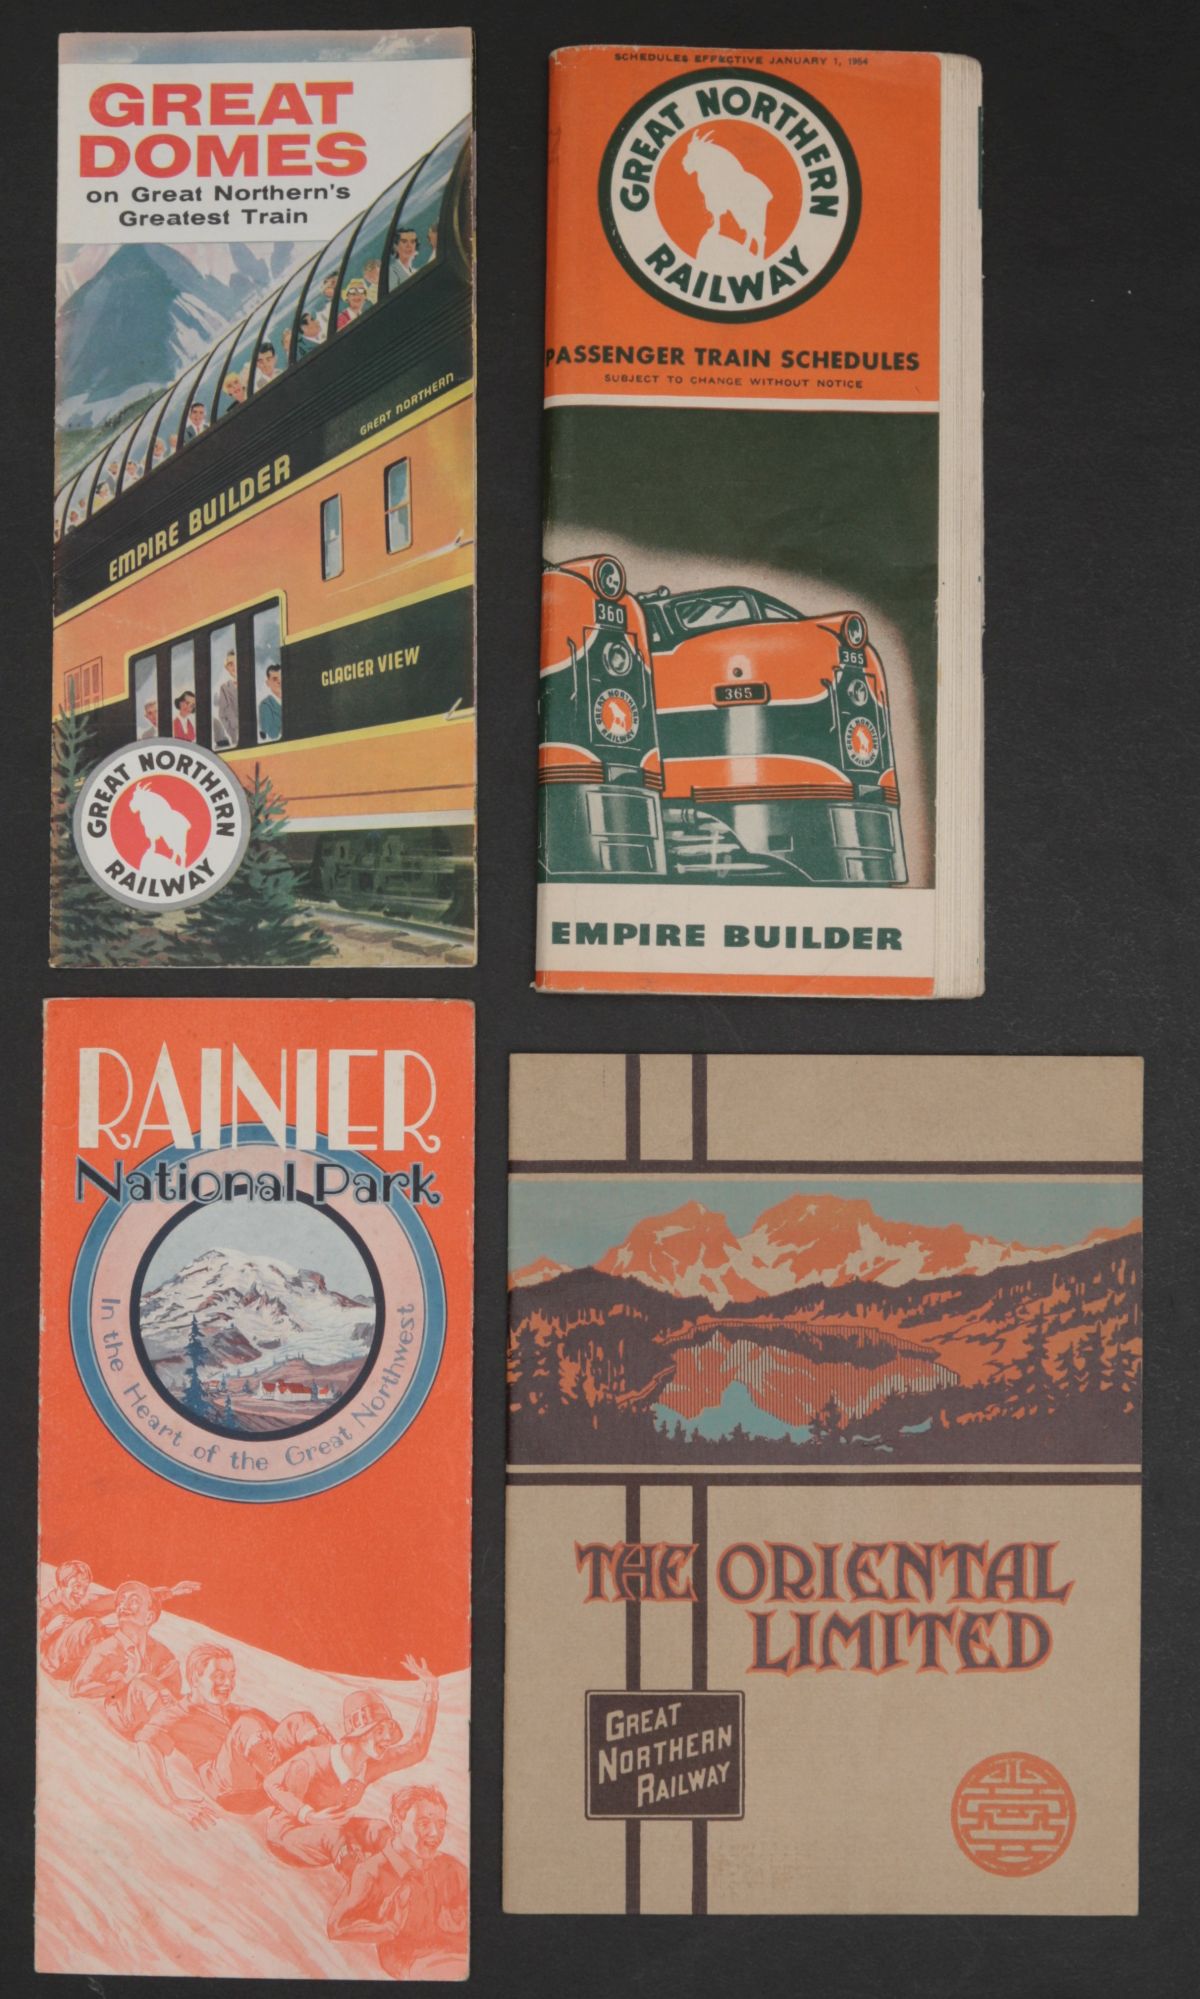 30 PIECES GREAT NORTHERN & CANADIAN PACIFIC RR EPHEMERA